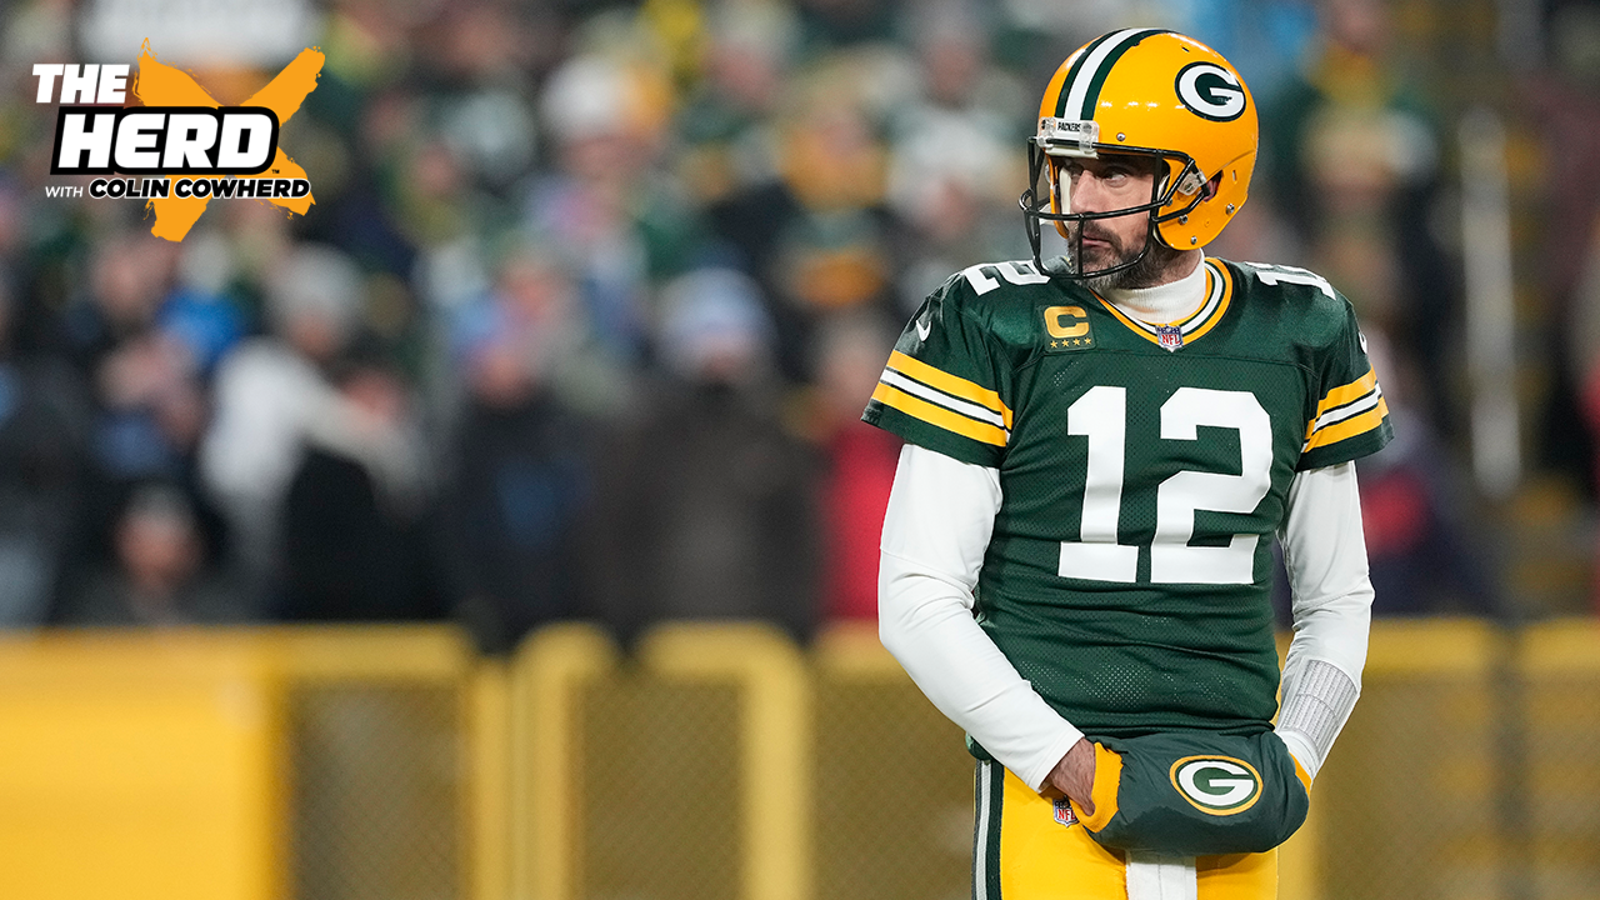 Has Aaron Rodgers played his last game in Green Bay?